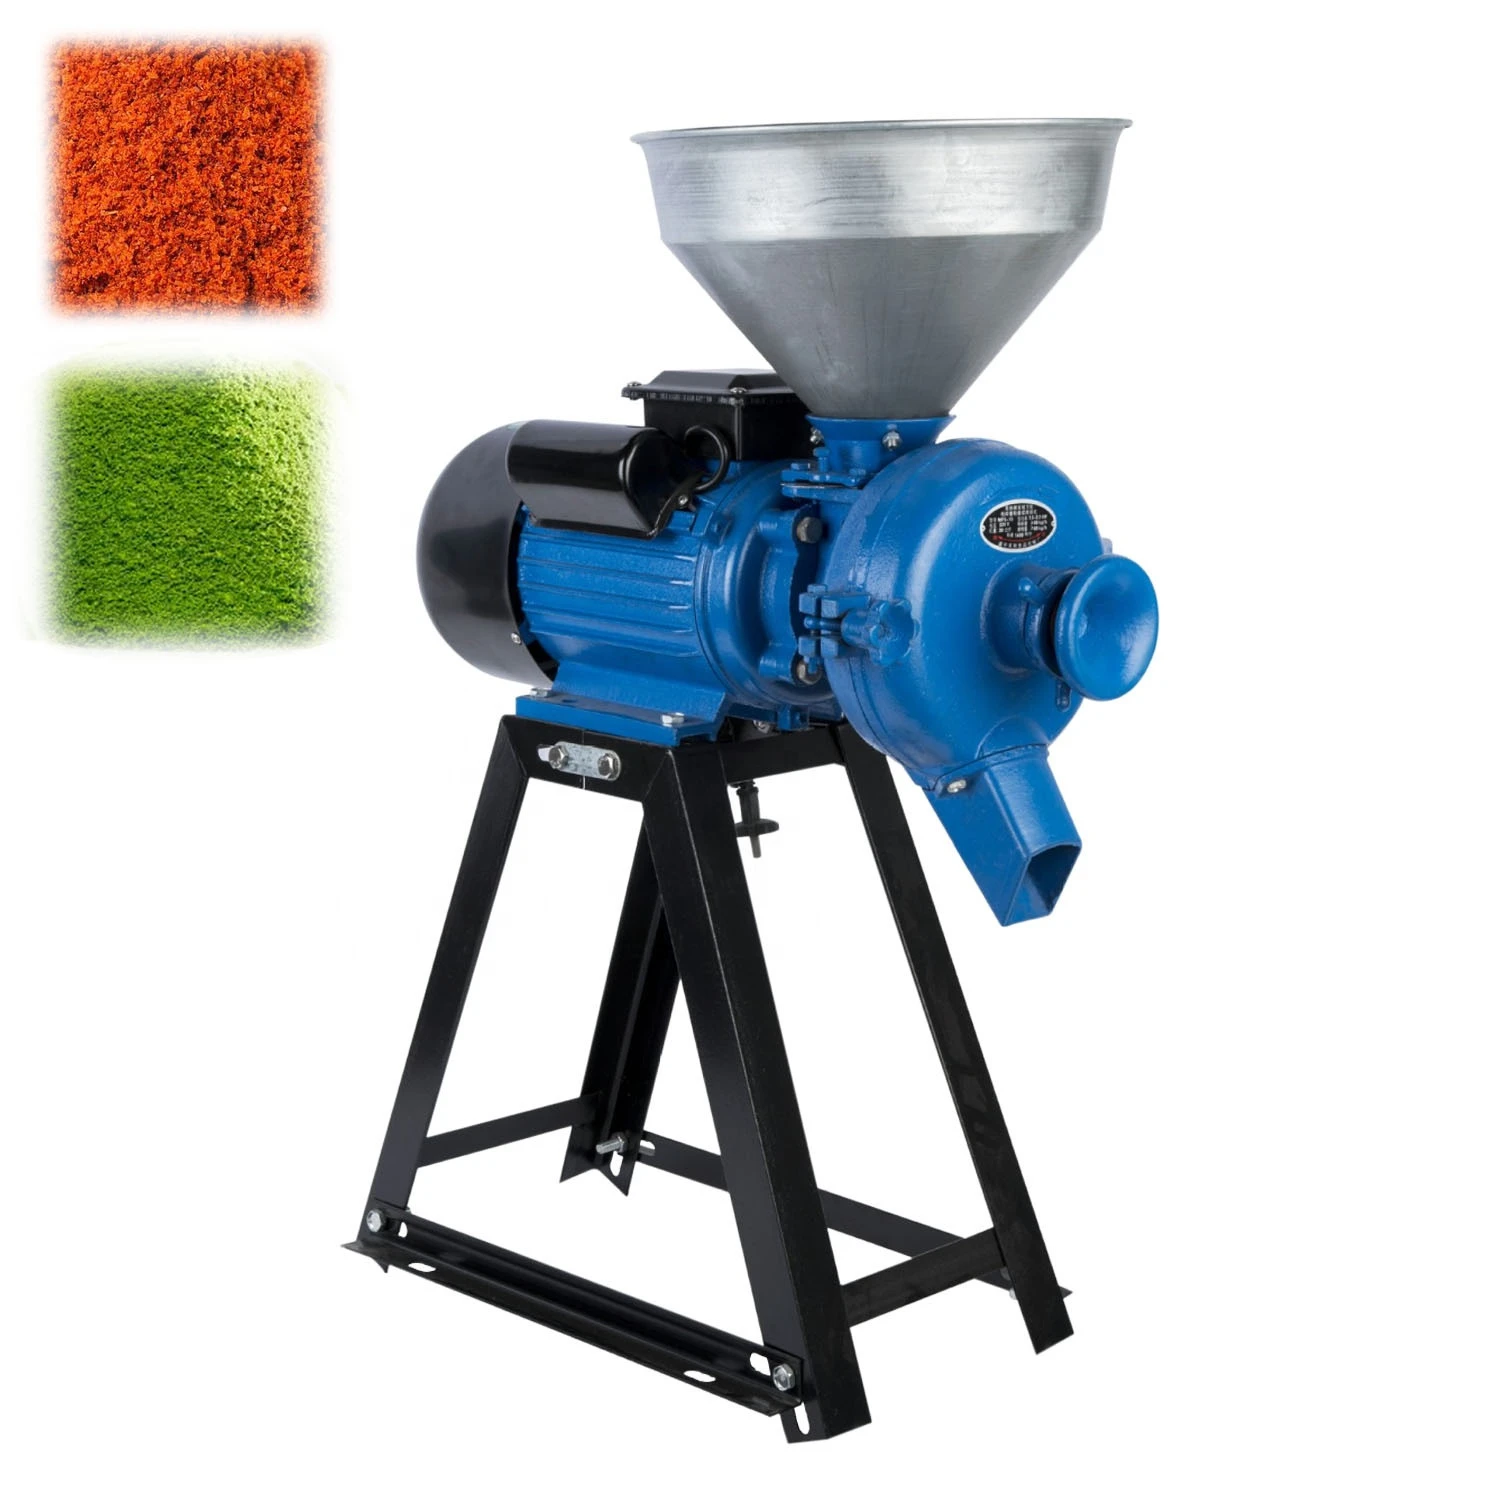 Chicken feed milling grinding machine for poultry equipment